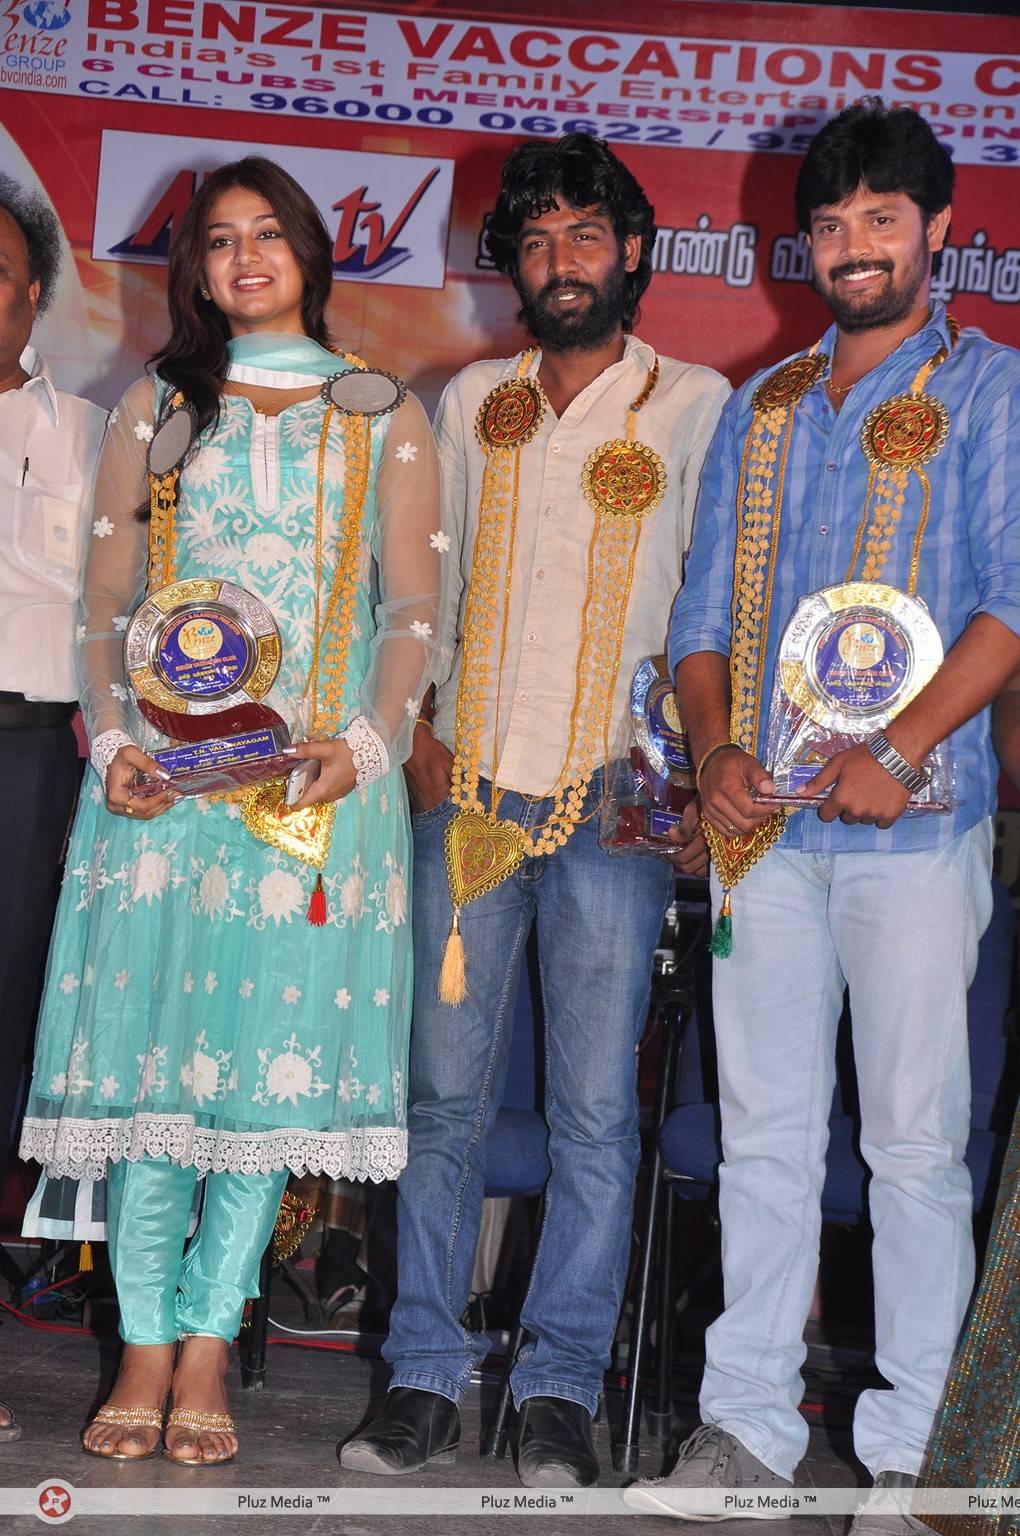 Benze Vaccations Club Awards 2013 Stills | Picture 427659